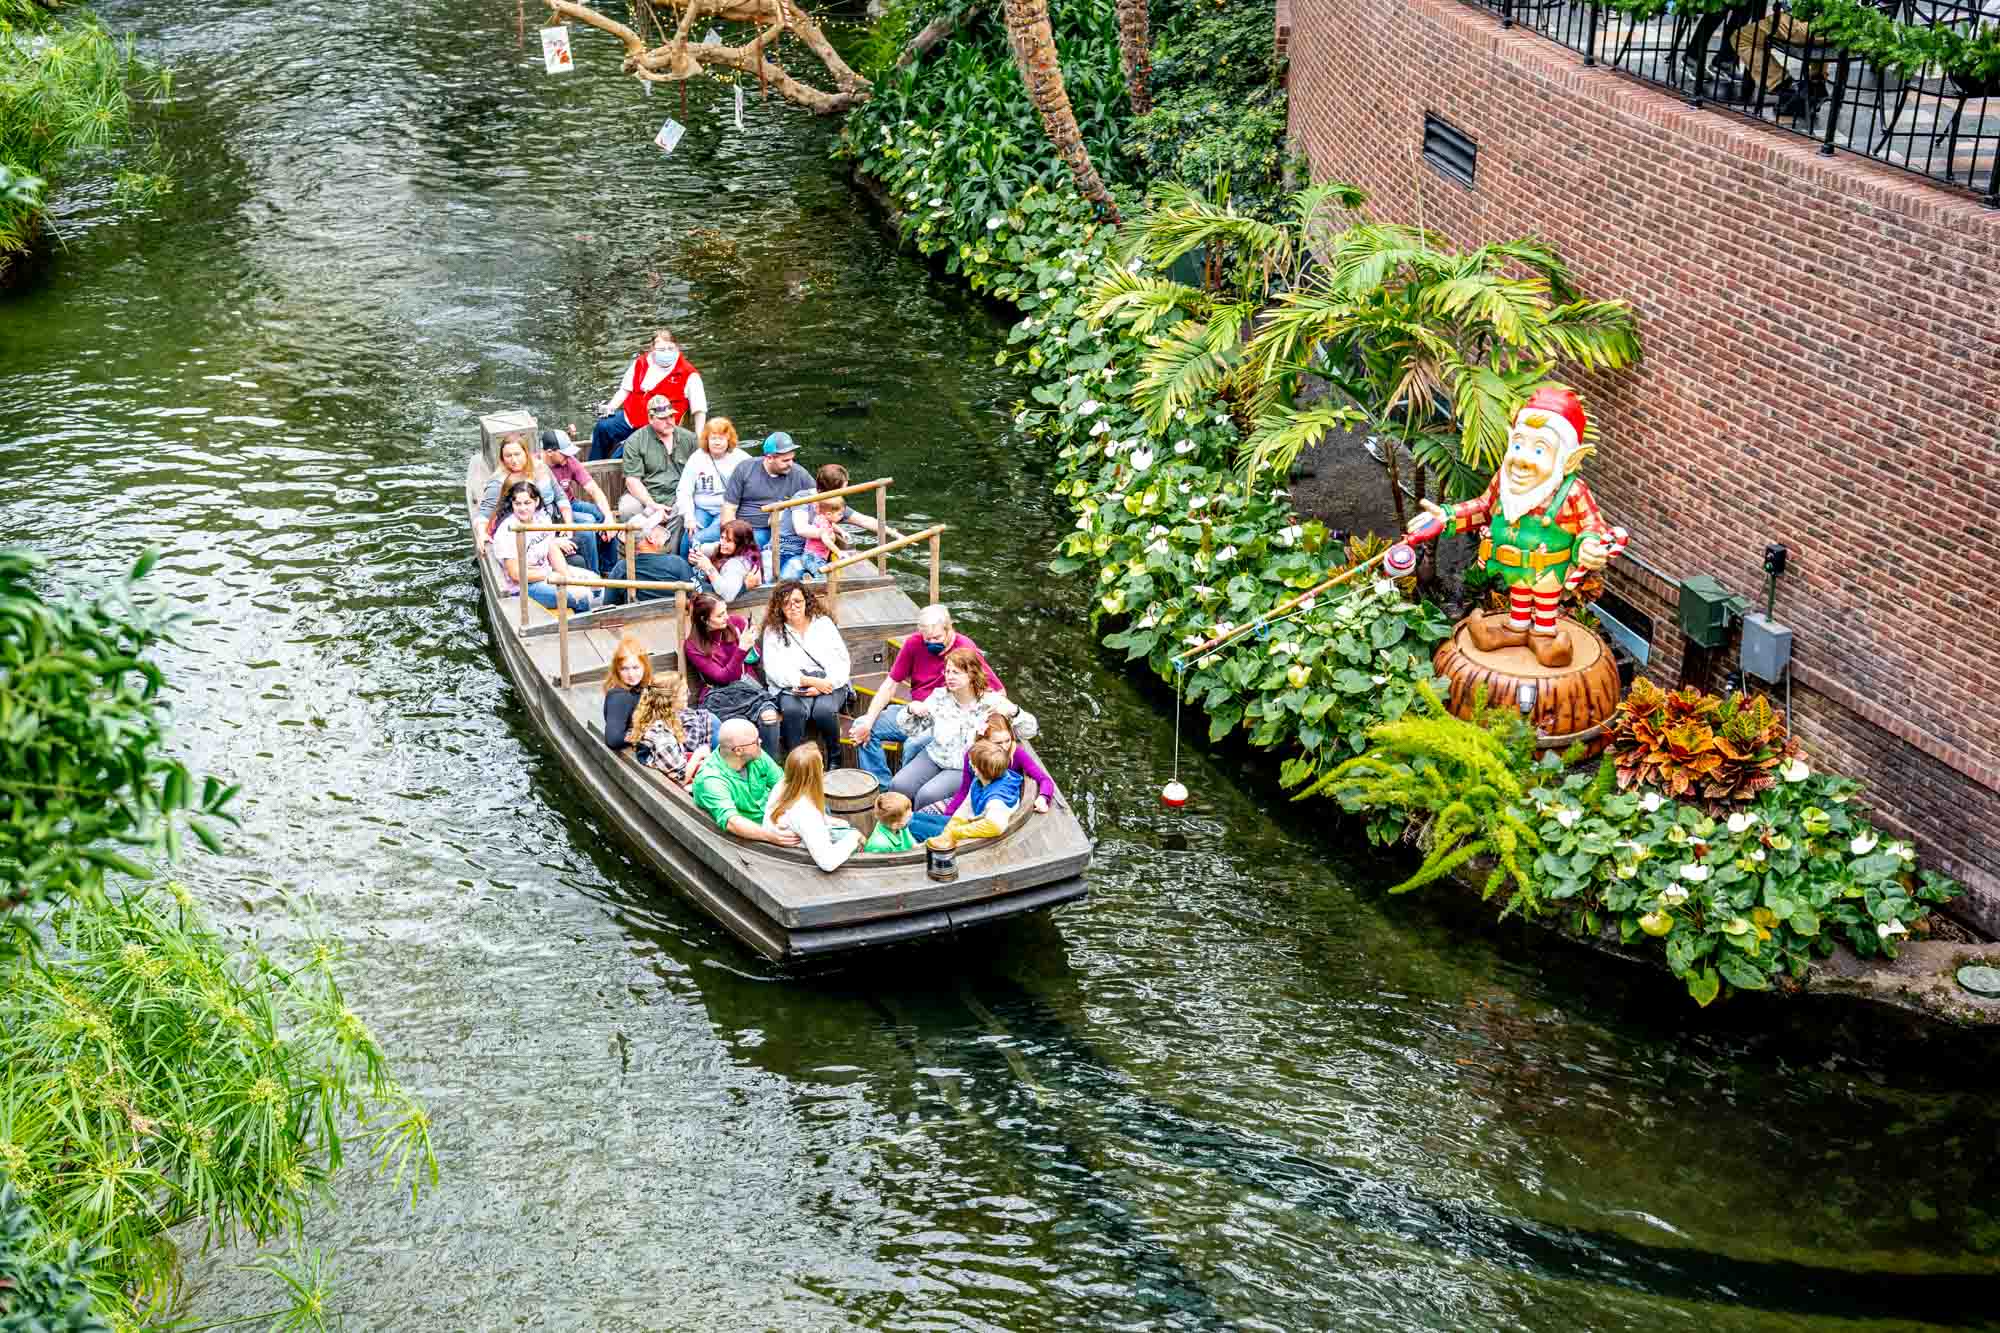 People in a boat cruising on an indoor river at they pass a brick wall